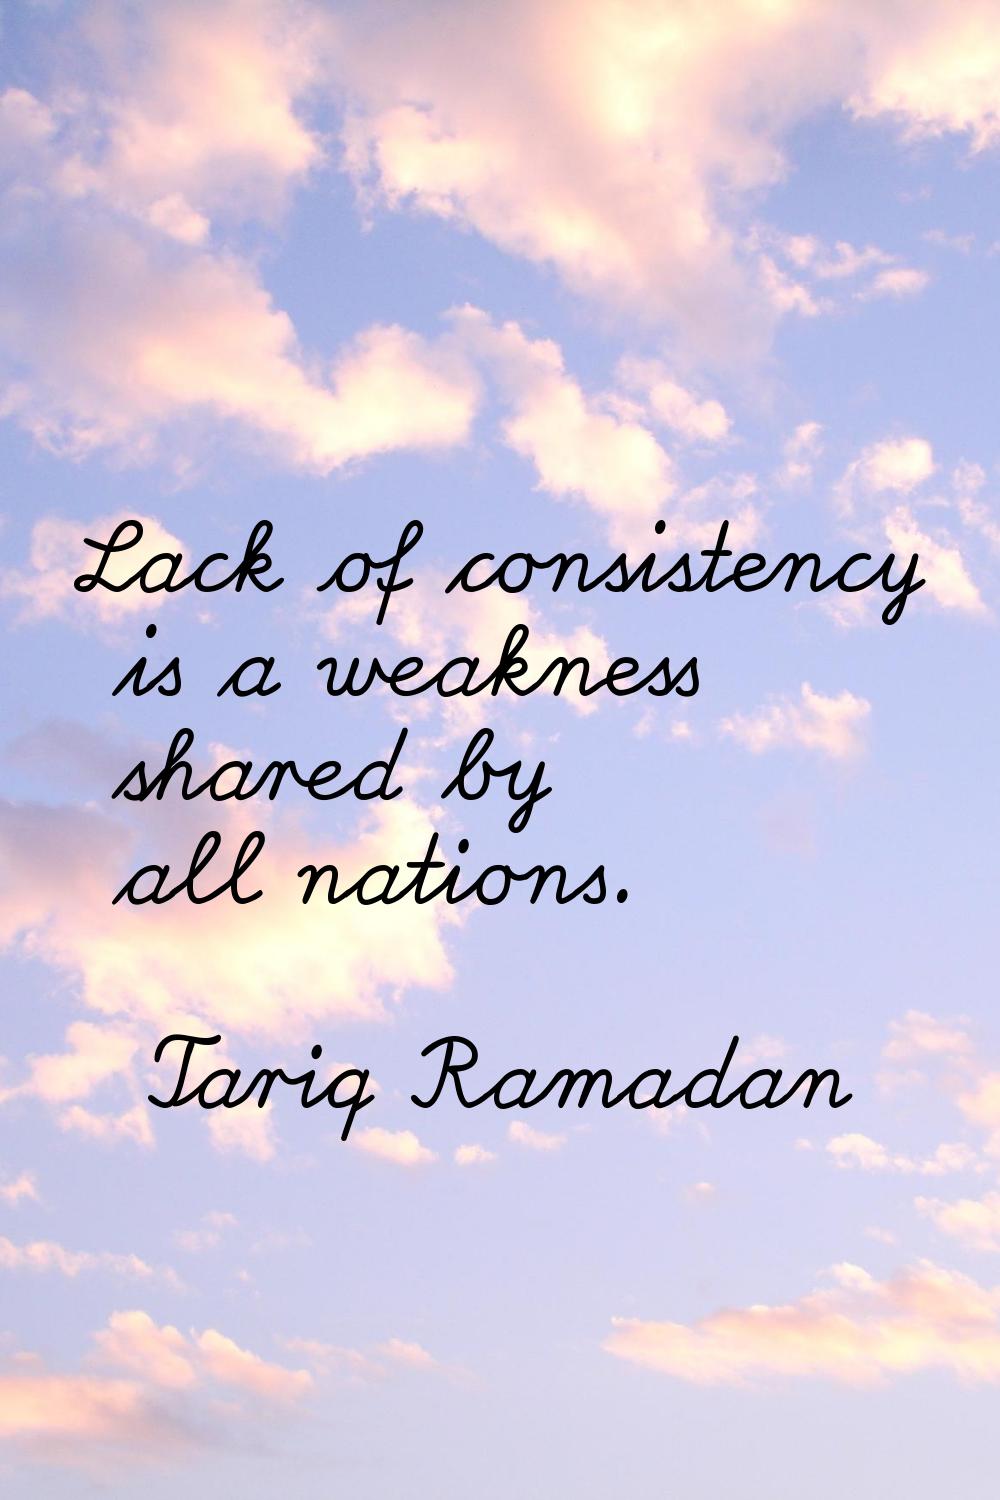 Lack of consistency is a weakness shared by all nations.